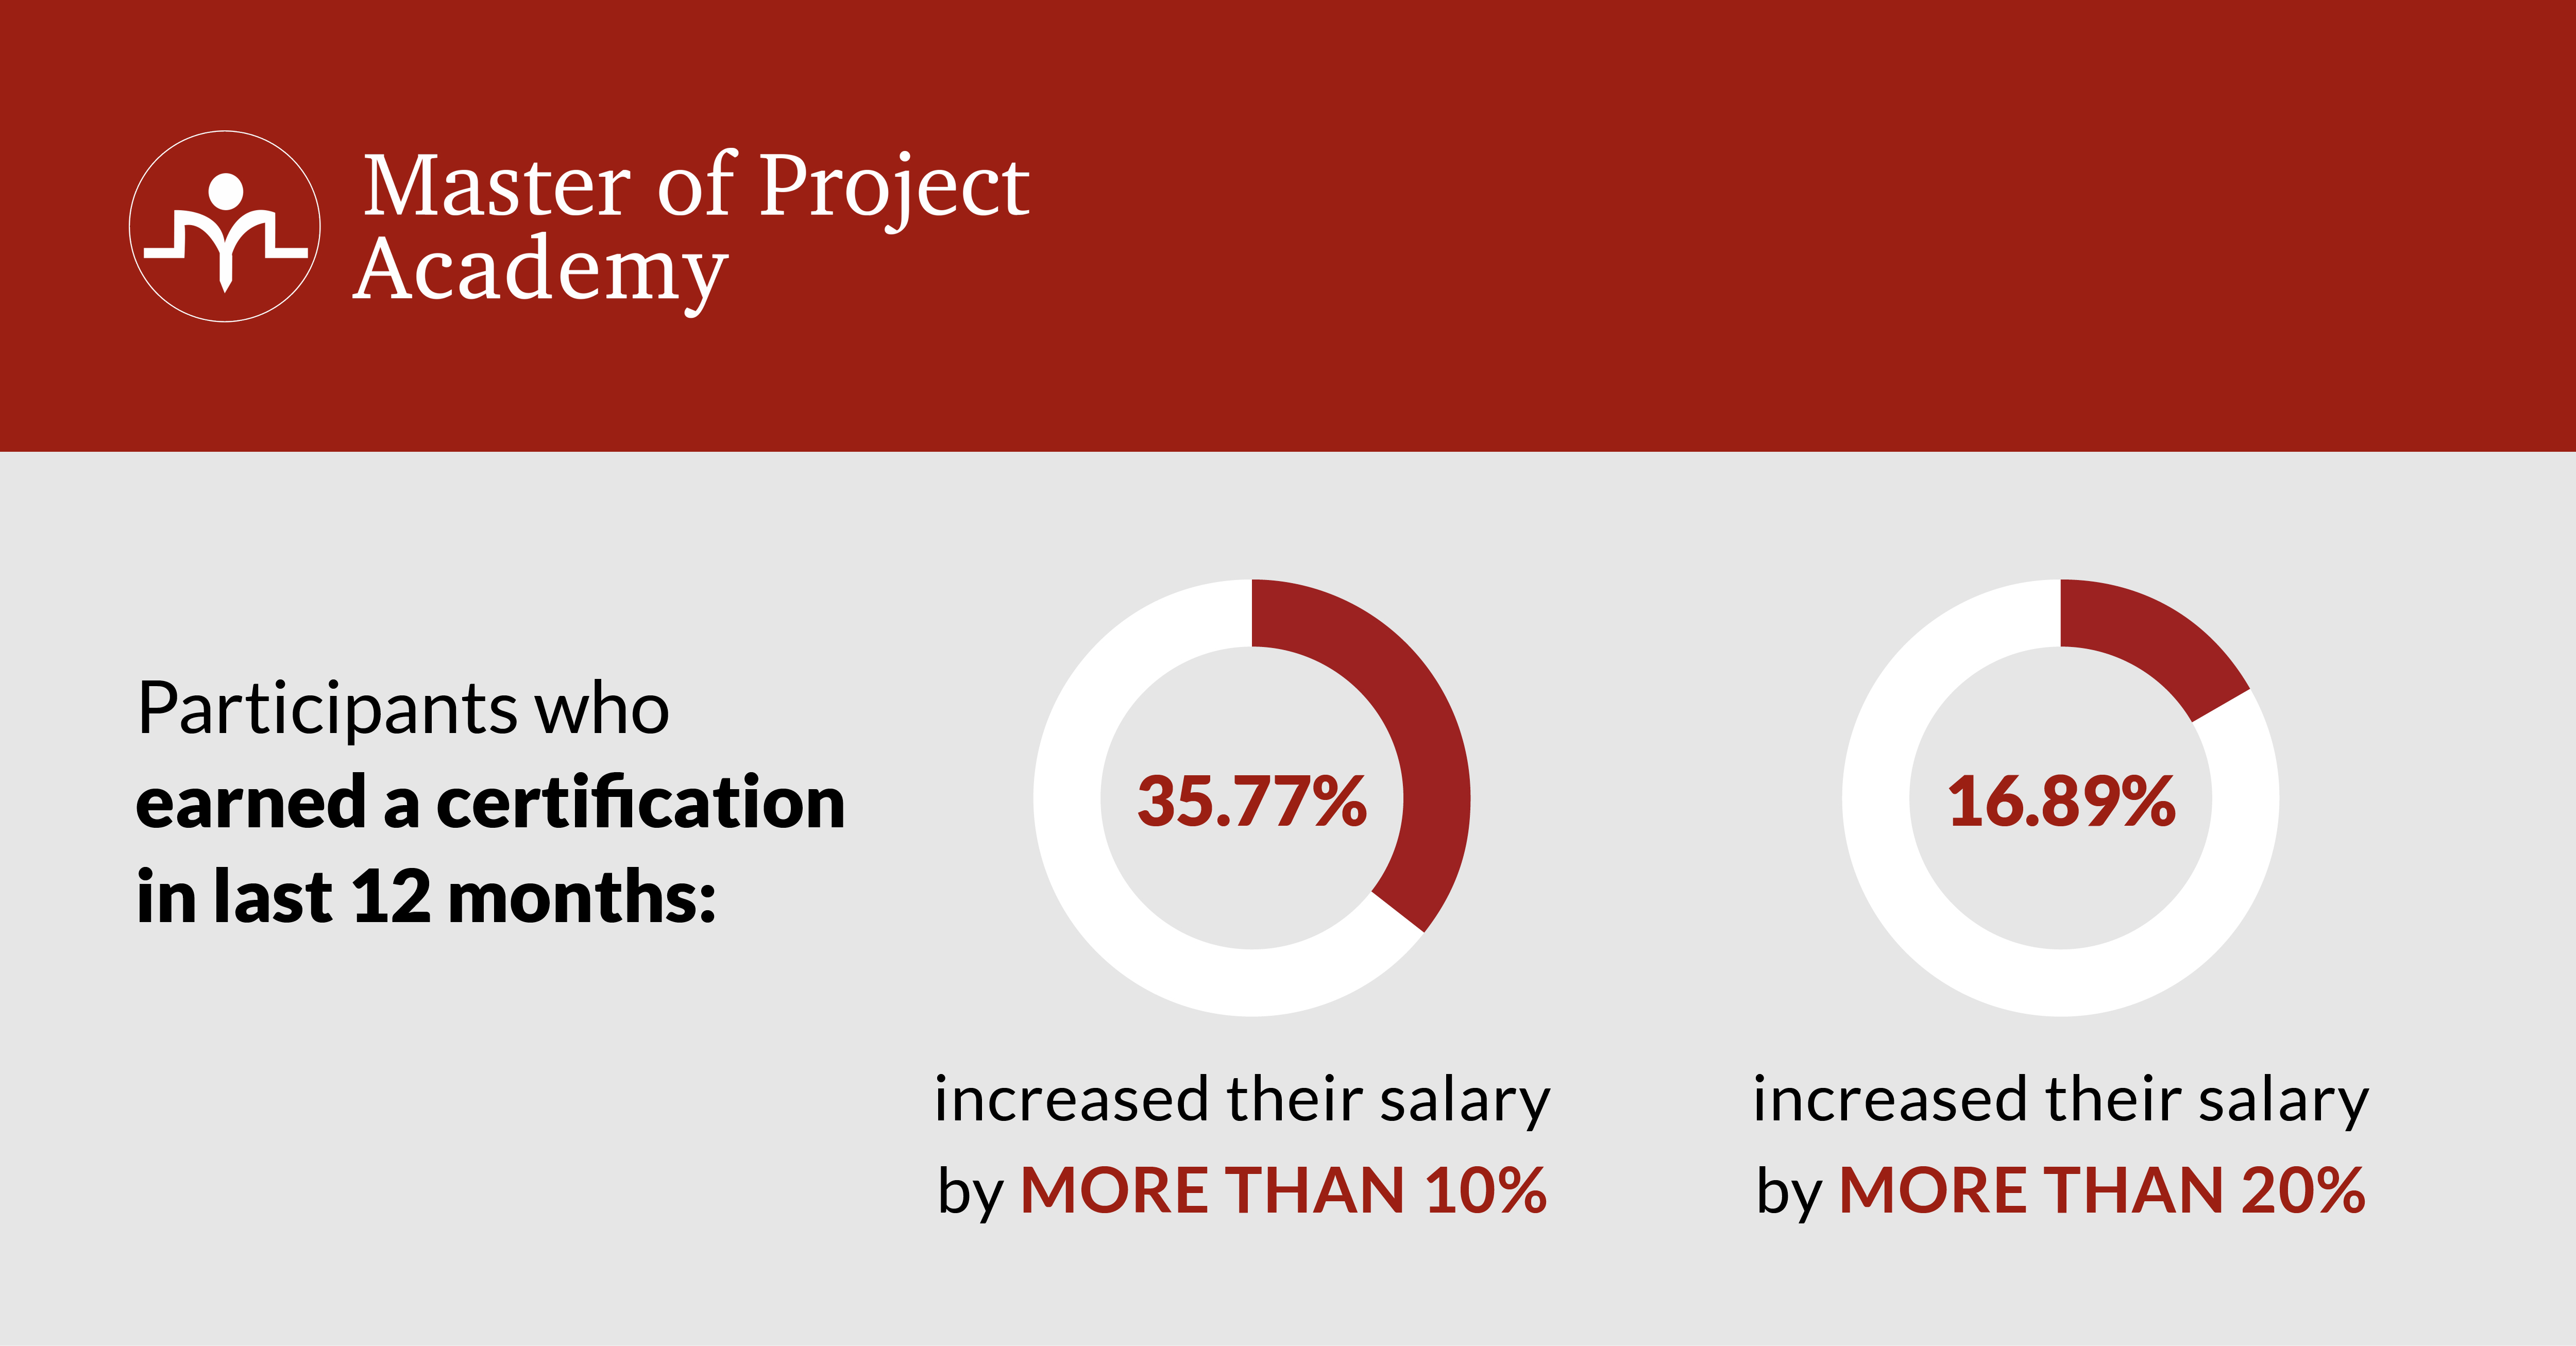 Post-Project Management Certification 35.77% of participants increased their salary by more than 10%